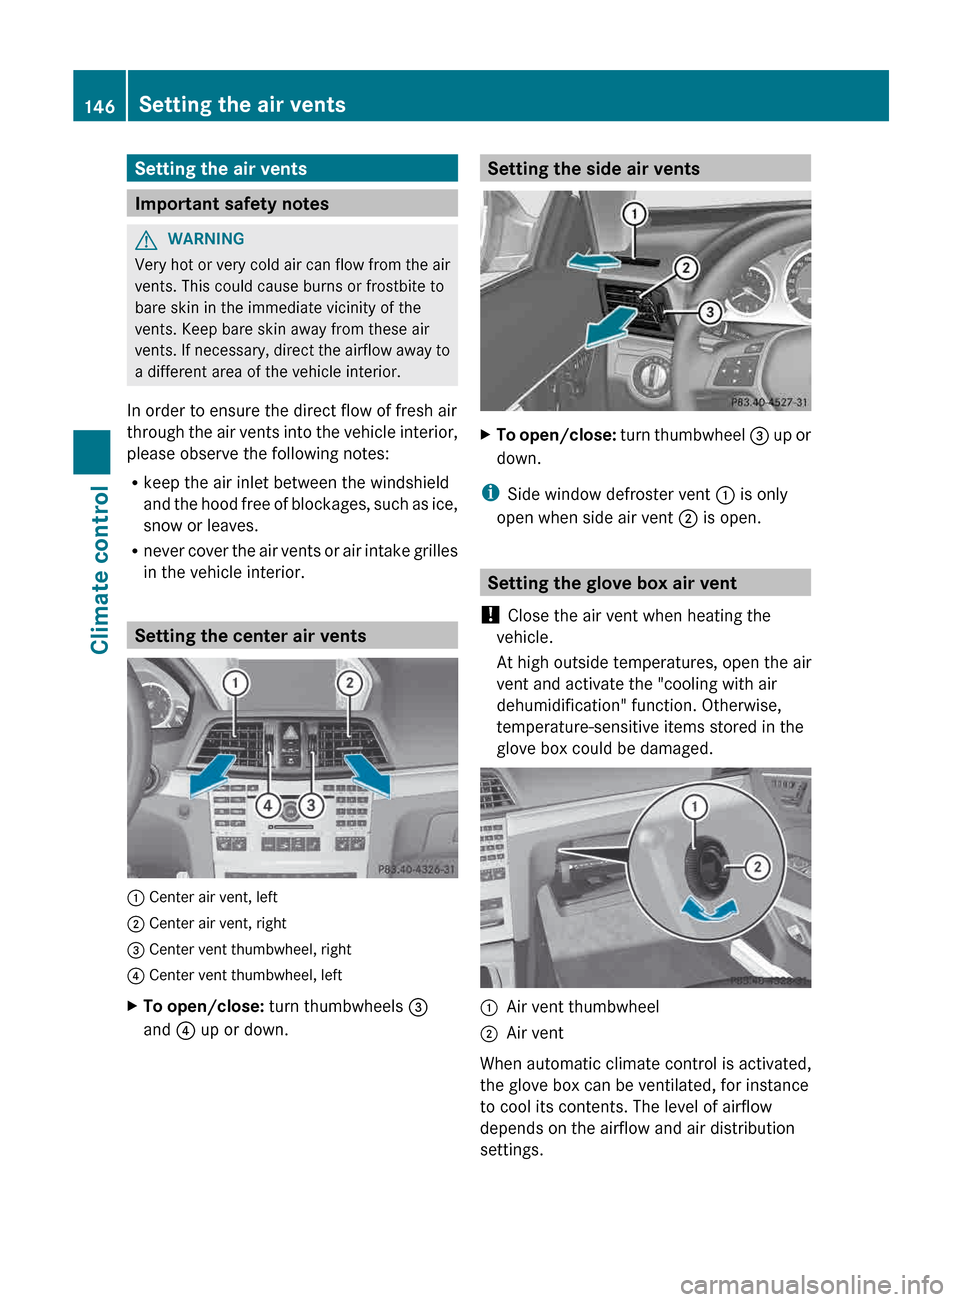 MERCEDES-BENZ E-Class COUPE 2013 C207 Owners Manual Setting the air vents
Important safety notes
G
WARNING
Very hot or very cold air can flow from the air
vents. This could cause burns or frostbite to
bare skin in the immediate vicinity of the
vents. K